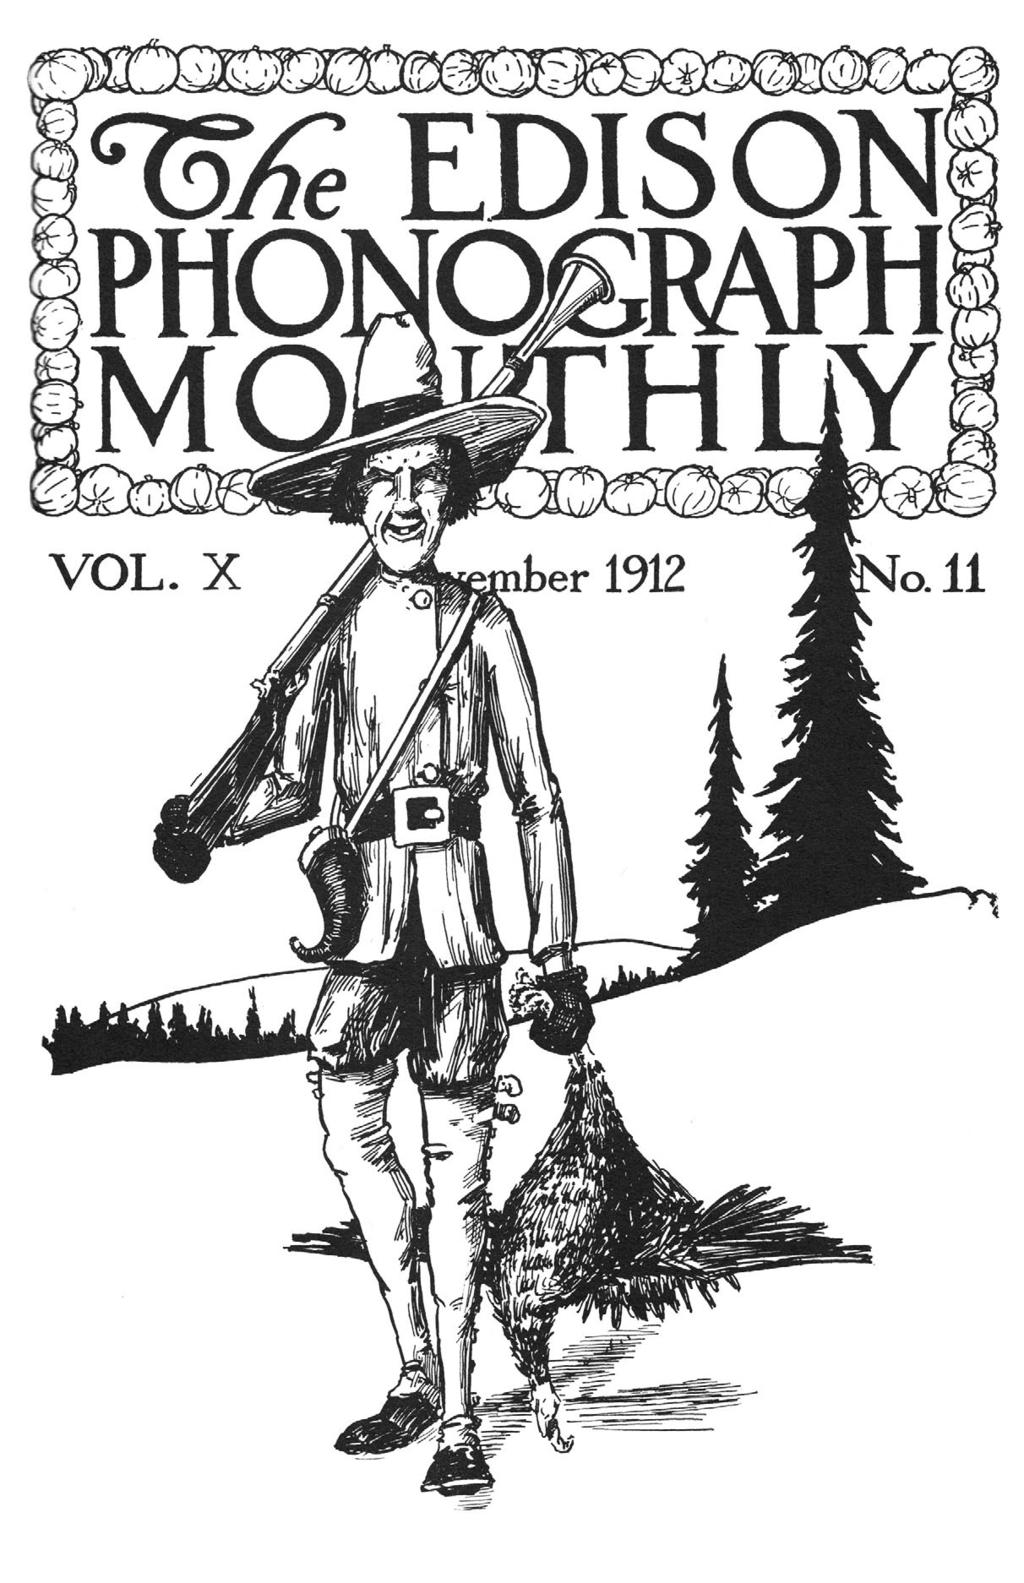 The original cover for the November 1912 release of The Edison Phonograph Monthly, containing the second list of